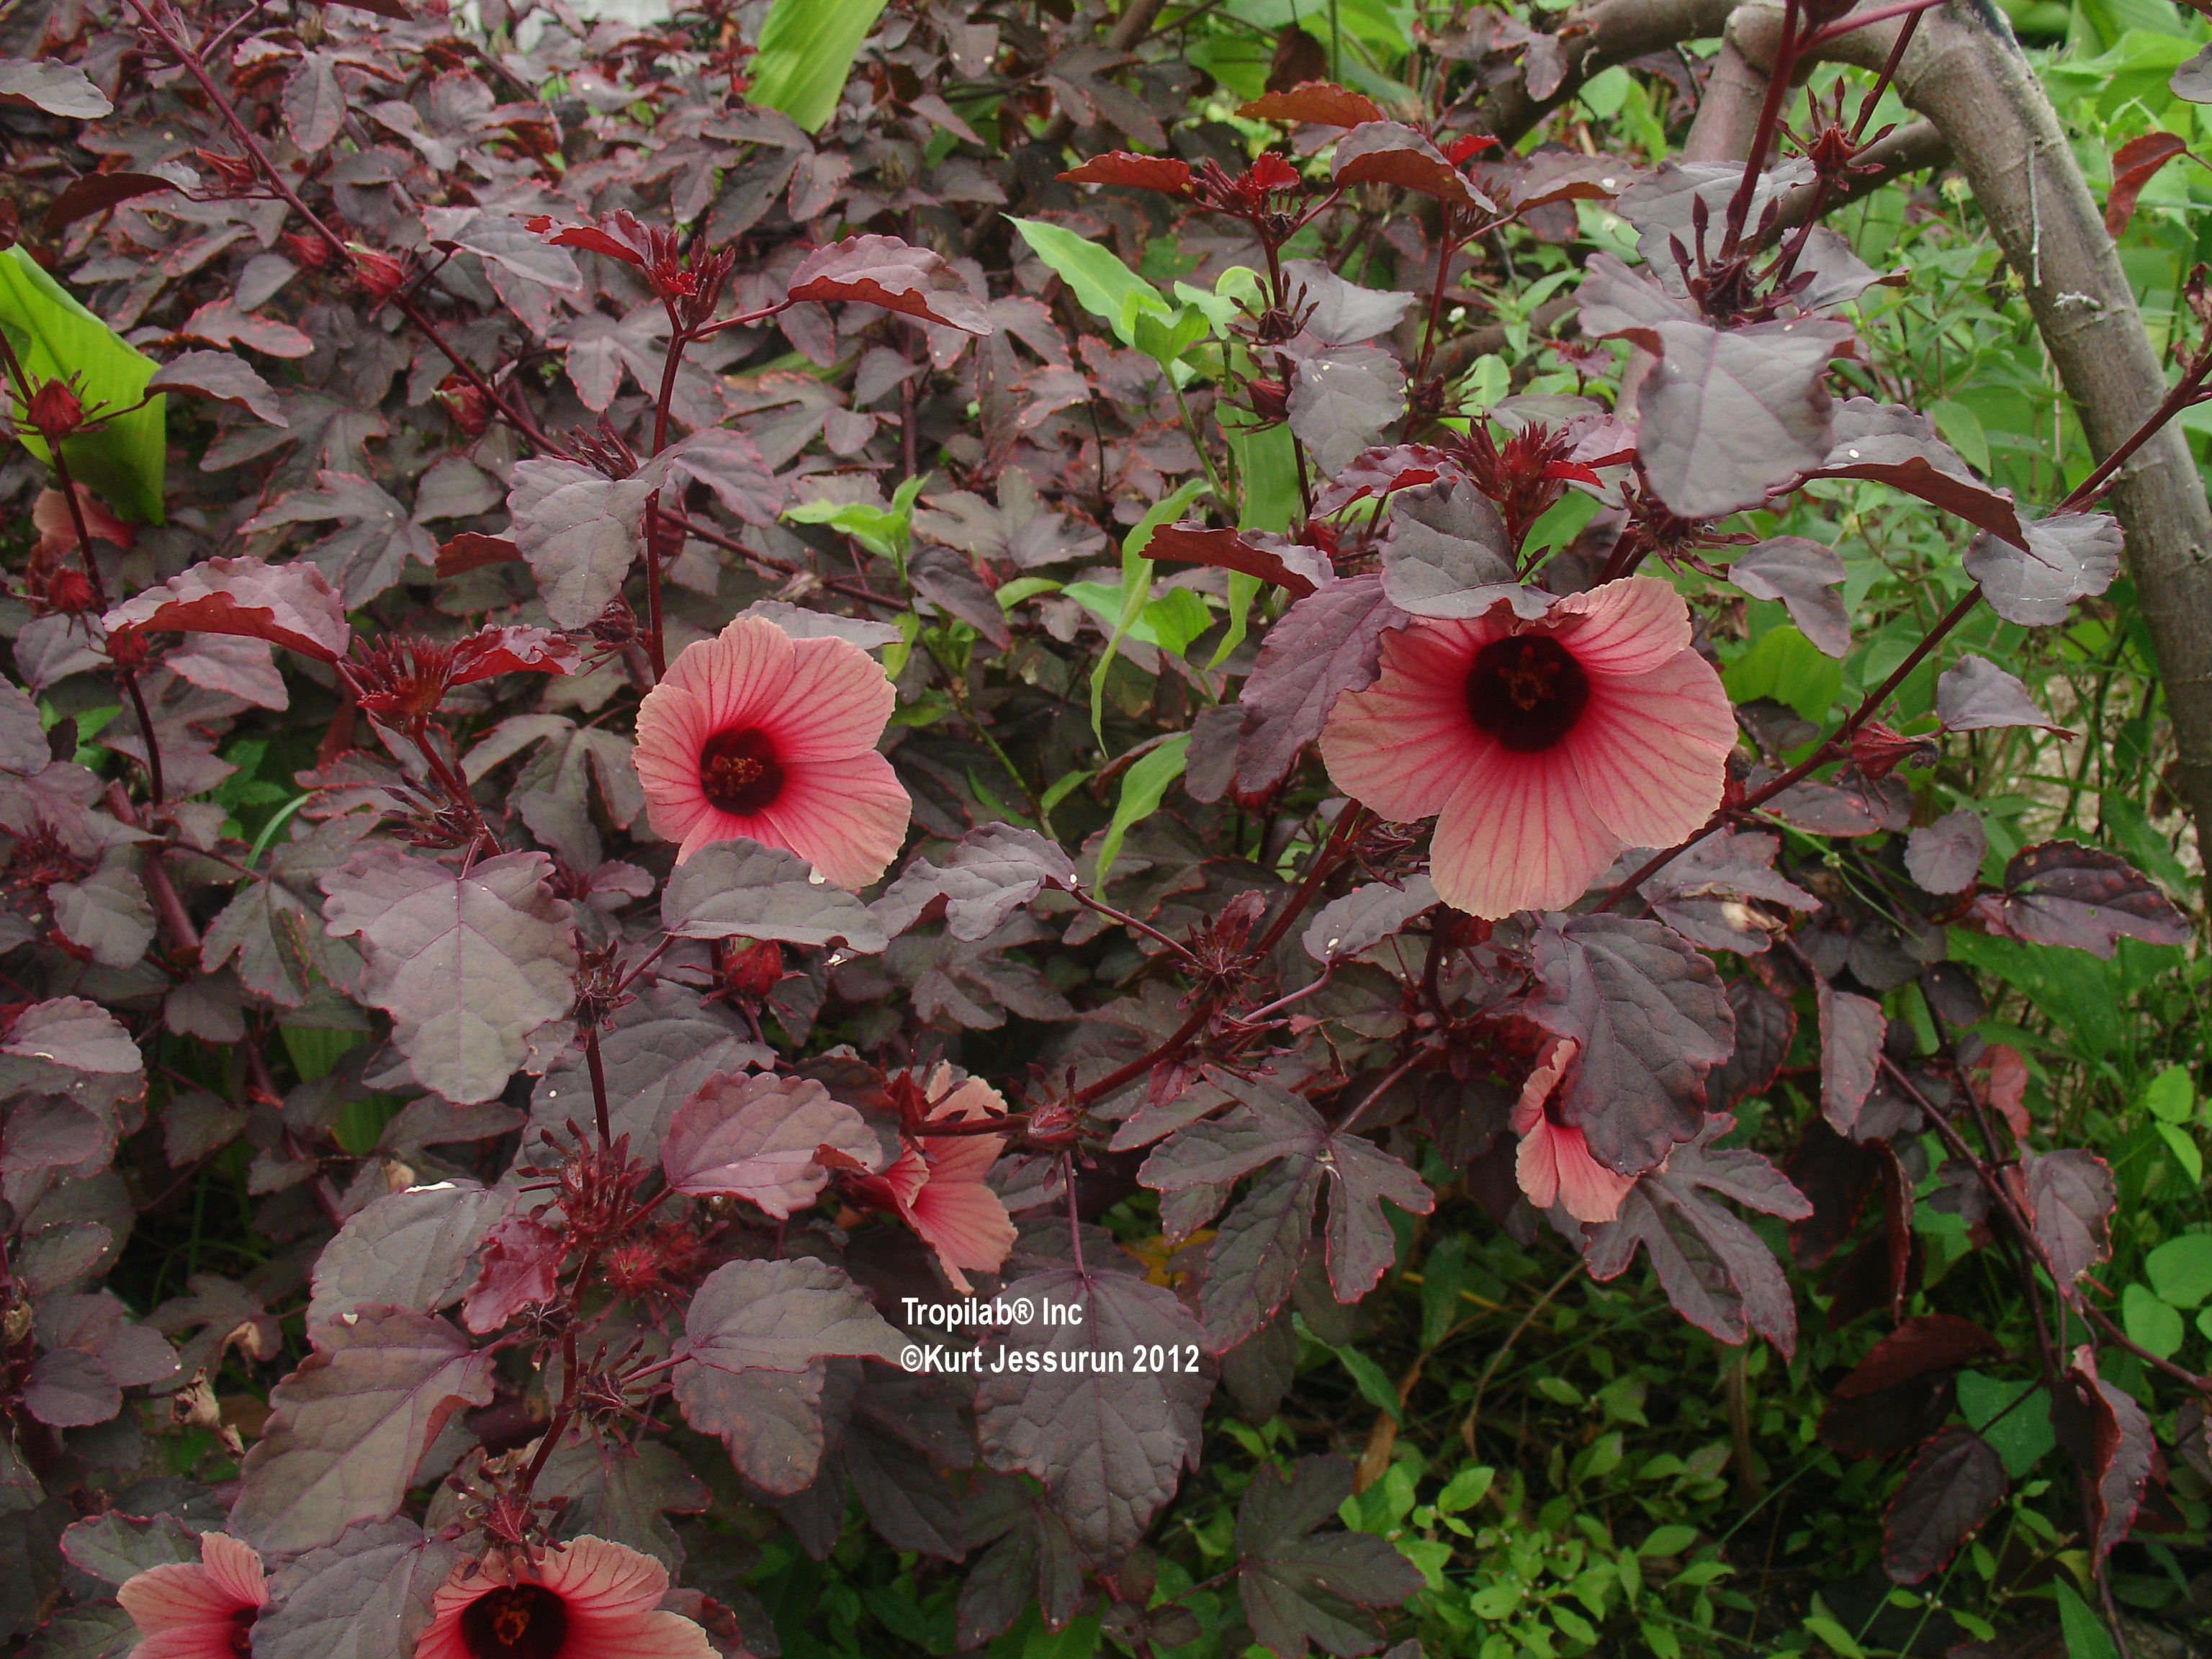 Hibiscus sabdariffa,Roselle used against cough, dyspepsia, fever, hypertension, high cholesterol and for stimulating 
intestinal peristalsis. Roselle also demonstrates significant anti-hyperammonemic and antioxidant activity